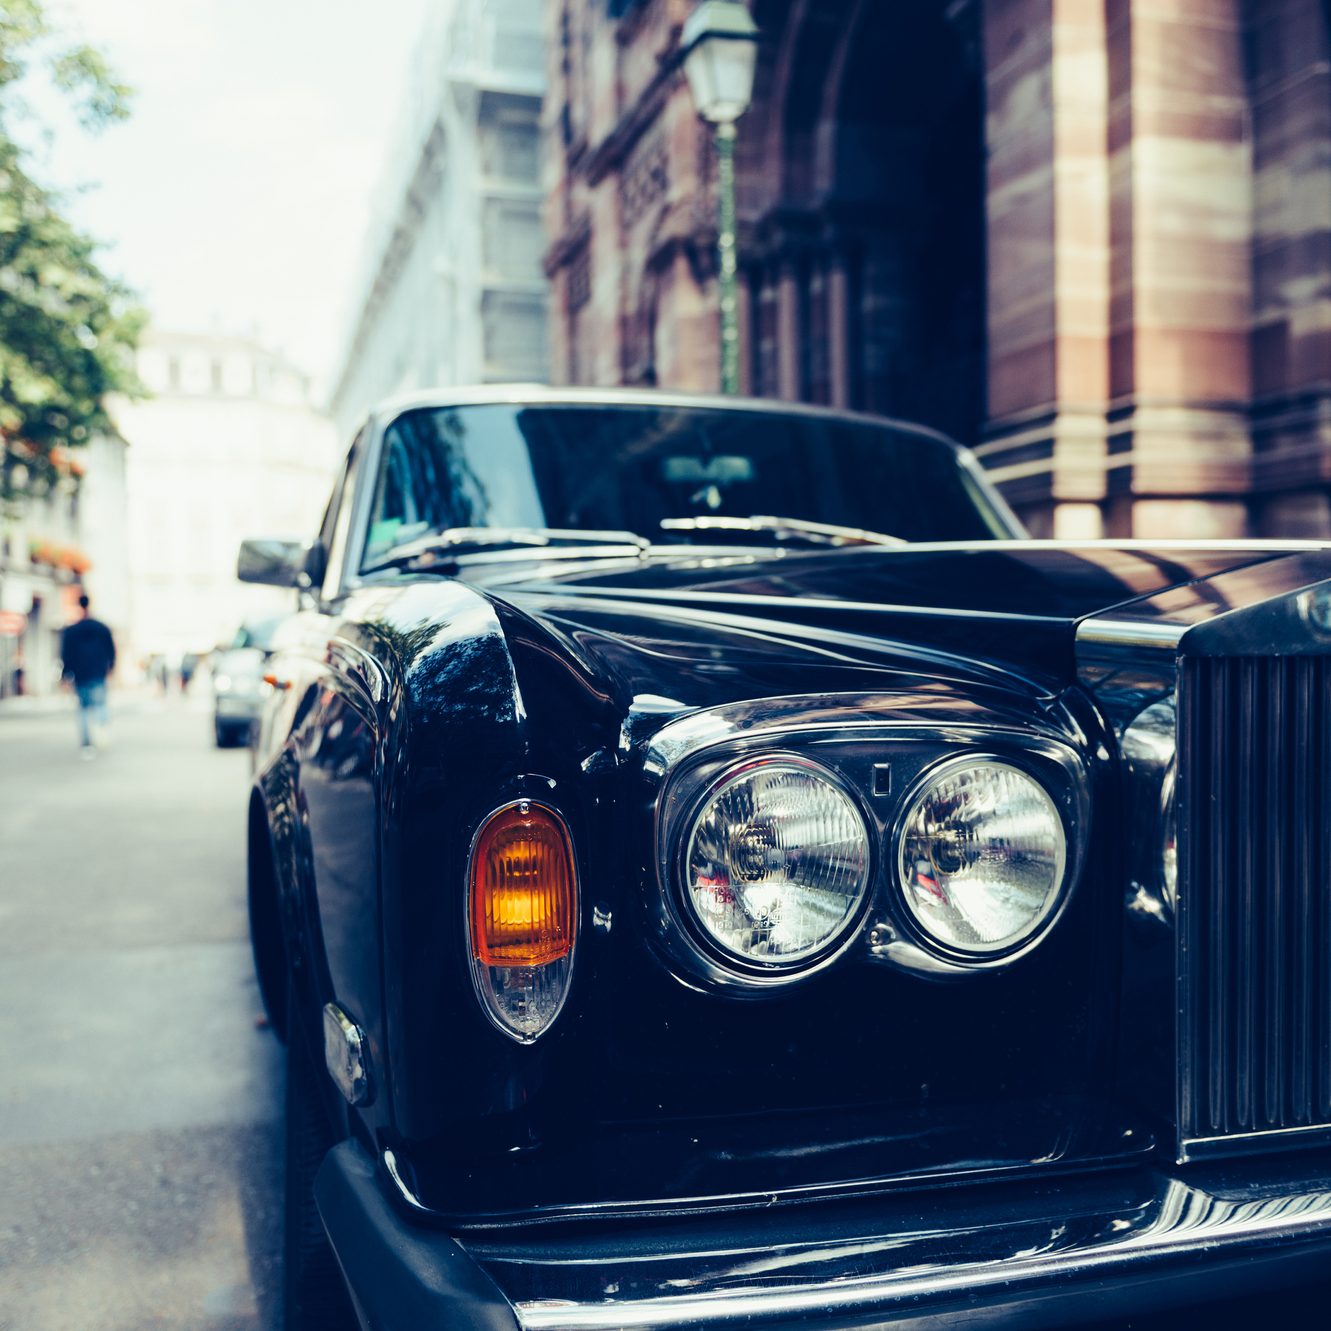 PARIS, FRANCE - SEP 12, 2016: Front view of Exclusive Luxury Rolls-Royce car limousine parked in city during fashion wedding vip event waiting for passenger. Rolls-Royce Limited is a British car-manufacturing and, later, aero-engine manufacturing company founded by Charles Stewart Rolls and Sir Frederick Henry Royce on 15 March 1906 as the result of a partnership formed in 1904.